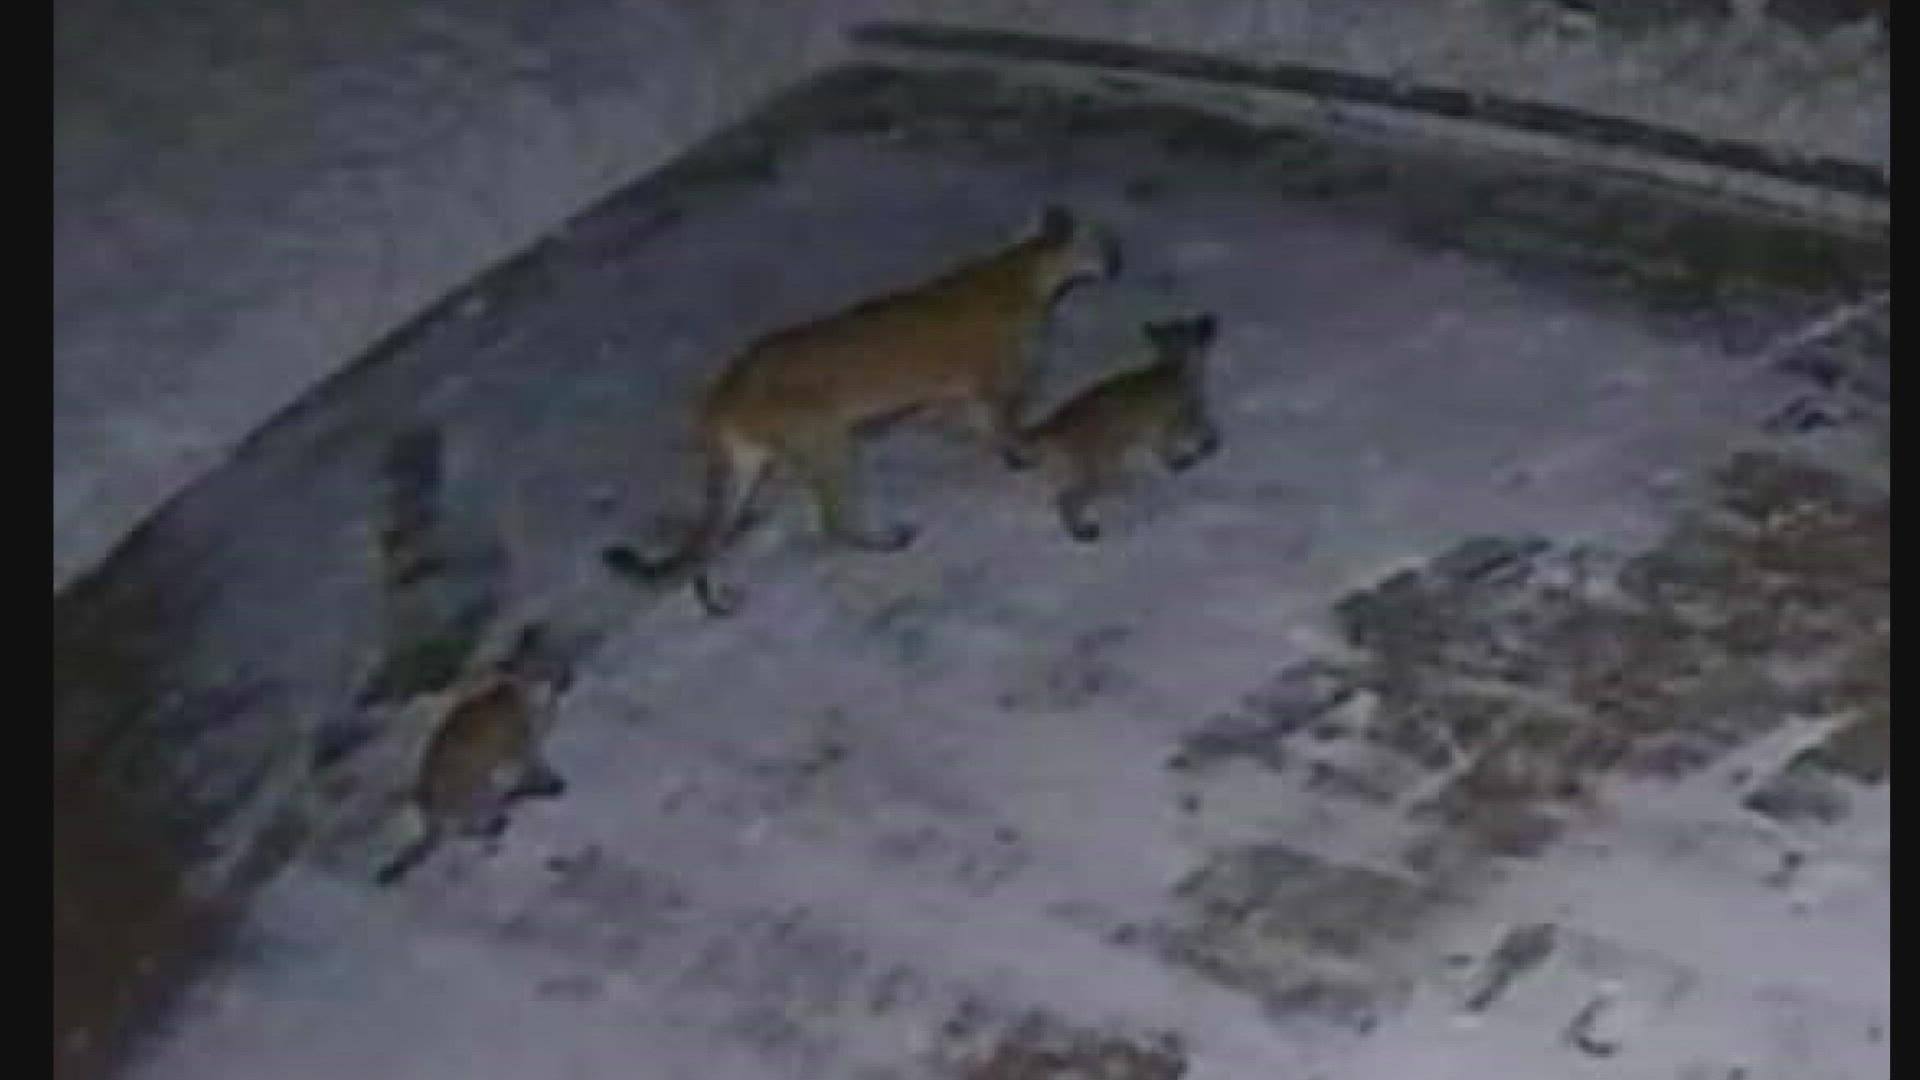 A mountain lion and its two cubs have been seen prowling the streets of Munds Park in northern Arizona. Residents say pets have been killed with no solution.